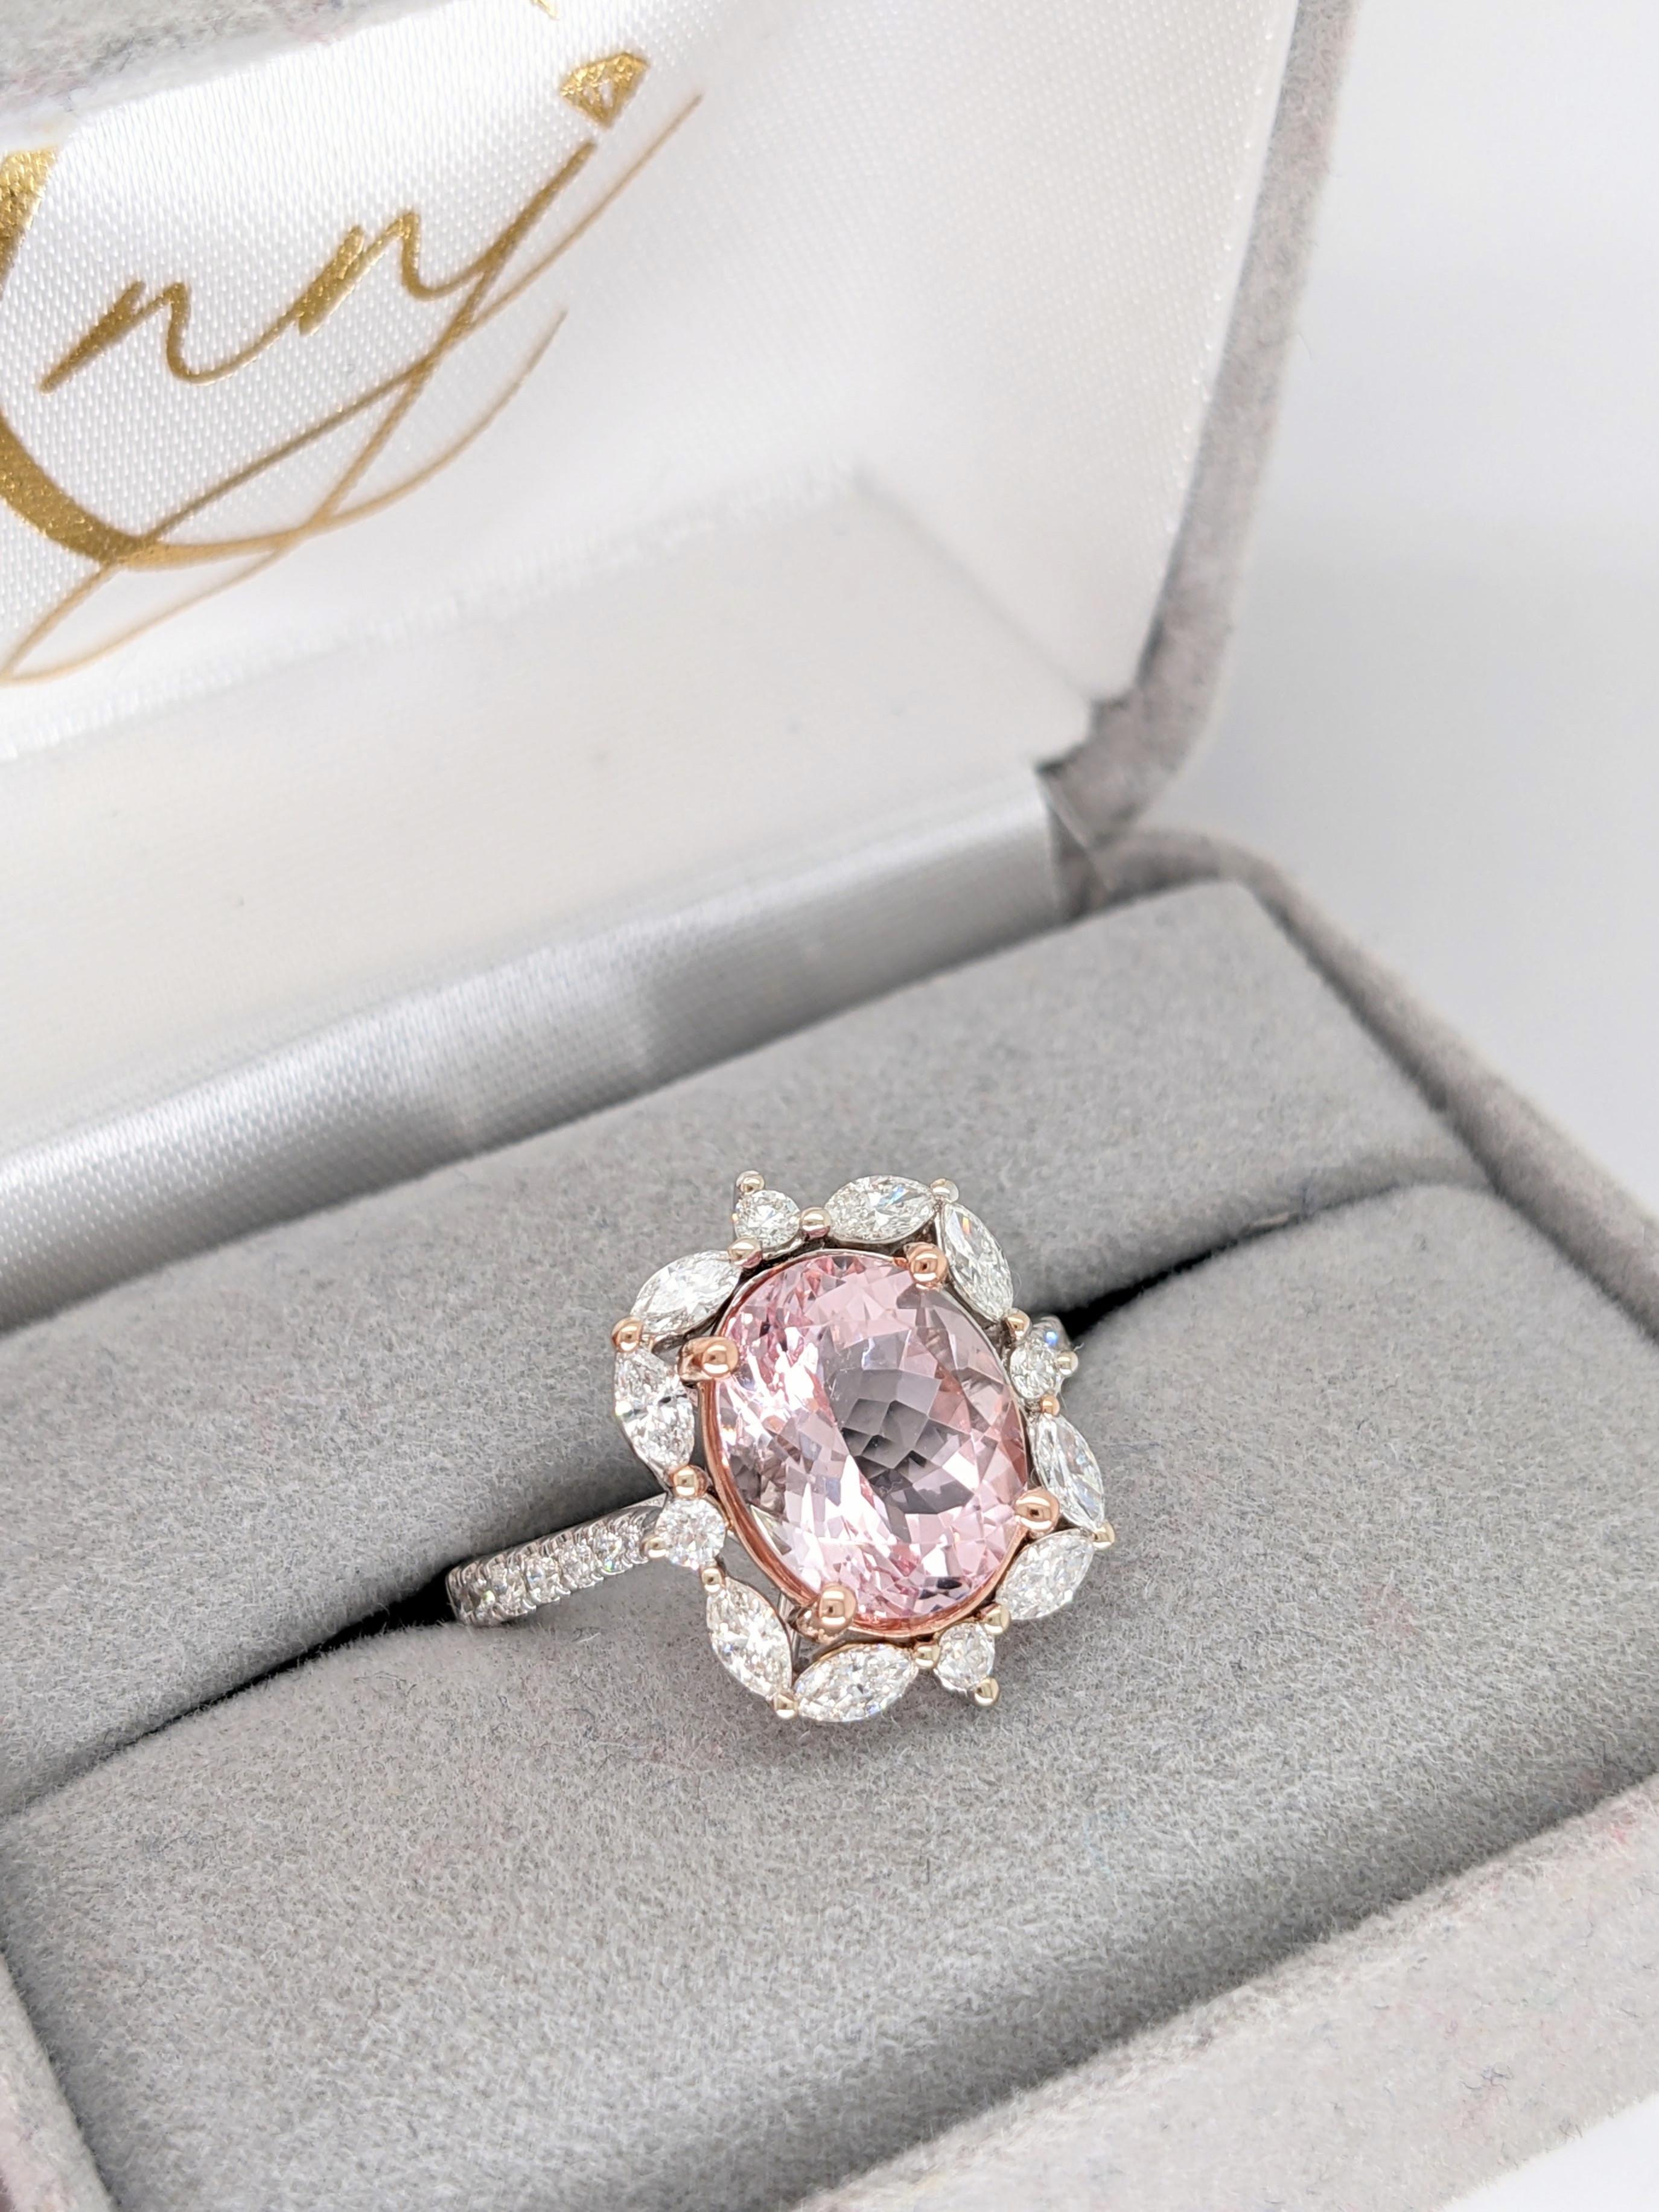 Art Deco 3 ct Pink Morganite and Diamond Ring in Solid 14K Dual White/Rose Gold Oval 11x9